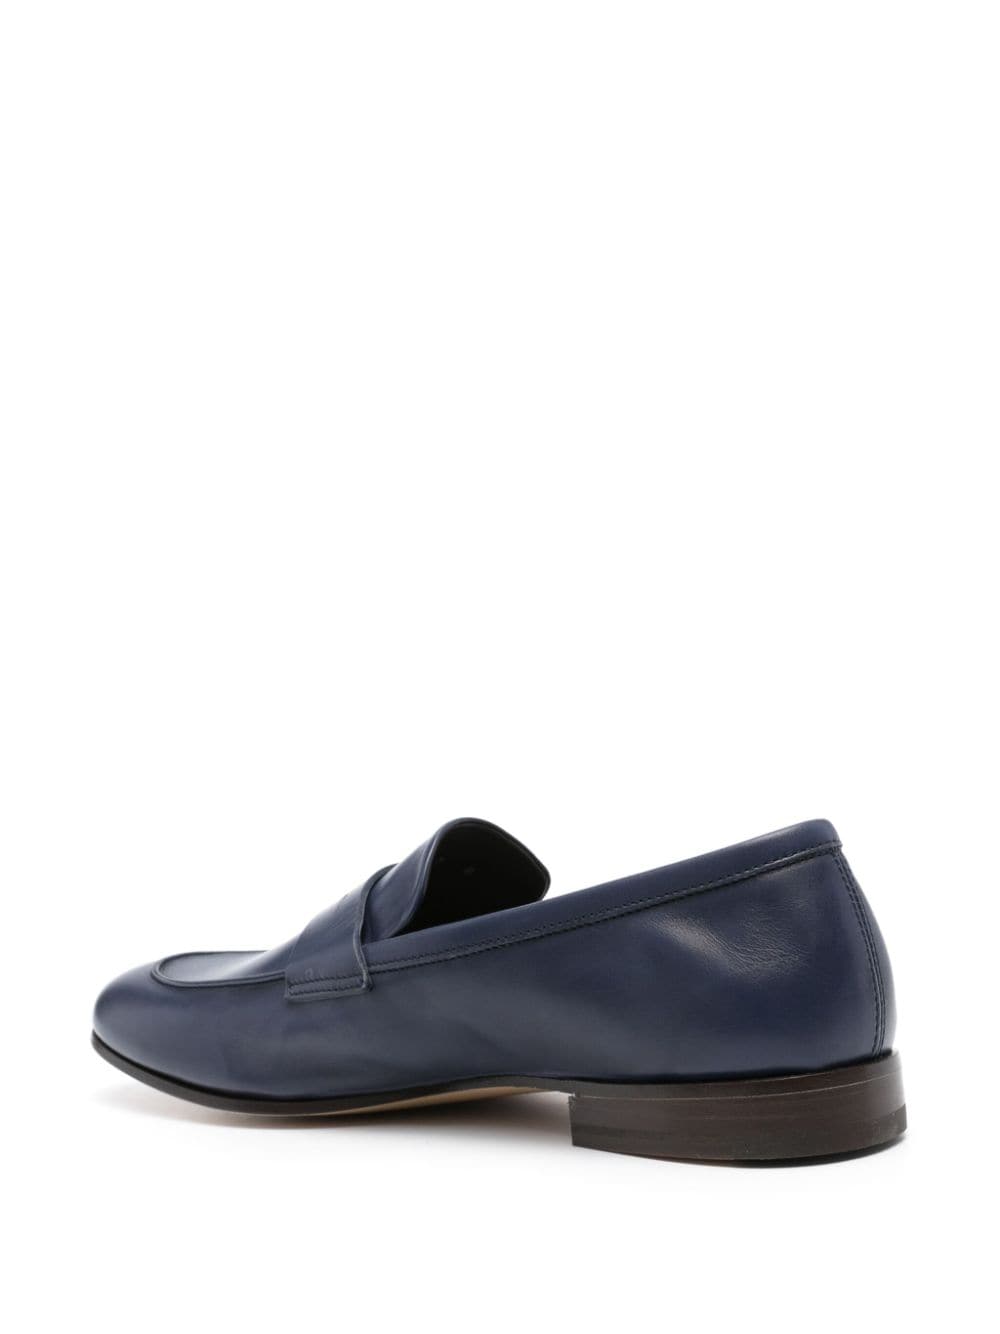 Navy blue leather moccasin